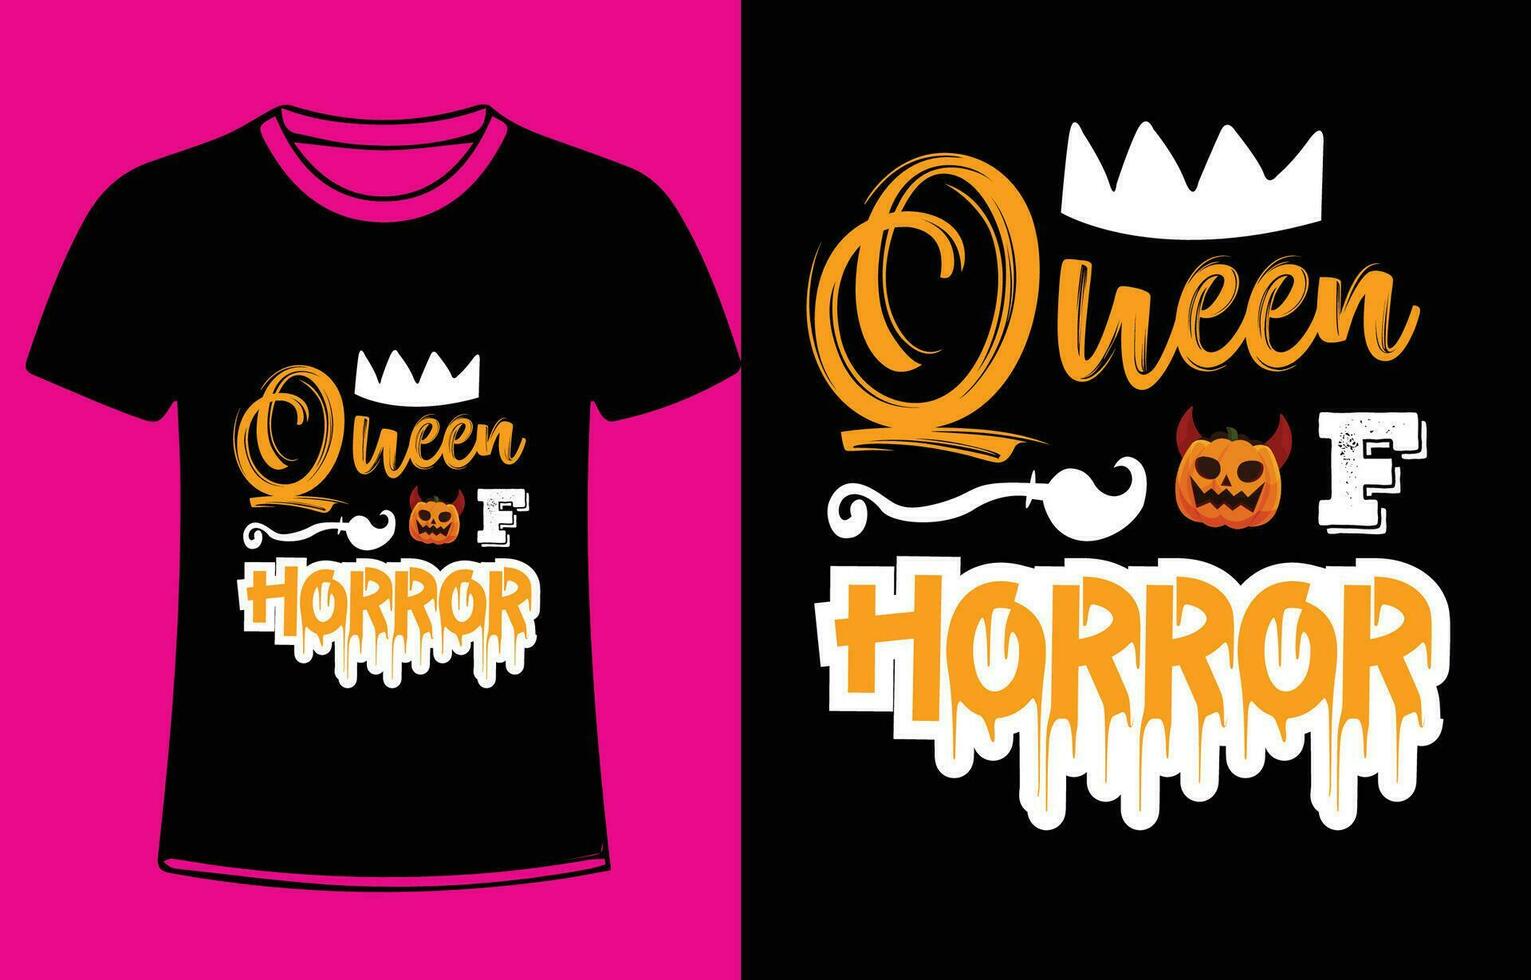 Halloween quote new t shirt design for t-shirt, cards, frame artwork, bags, mugs, stickers, tumblers, phone cases, print etc. vector